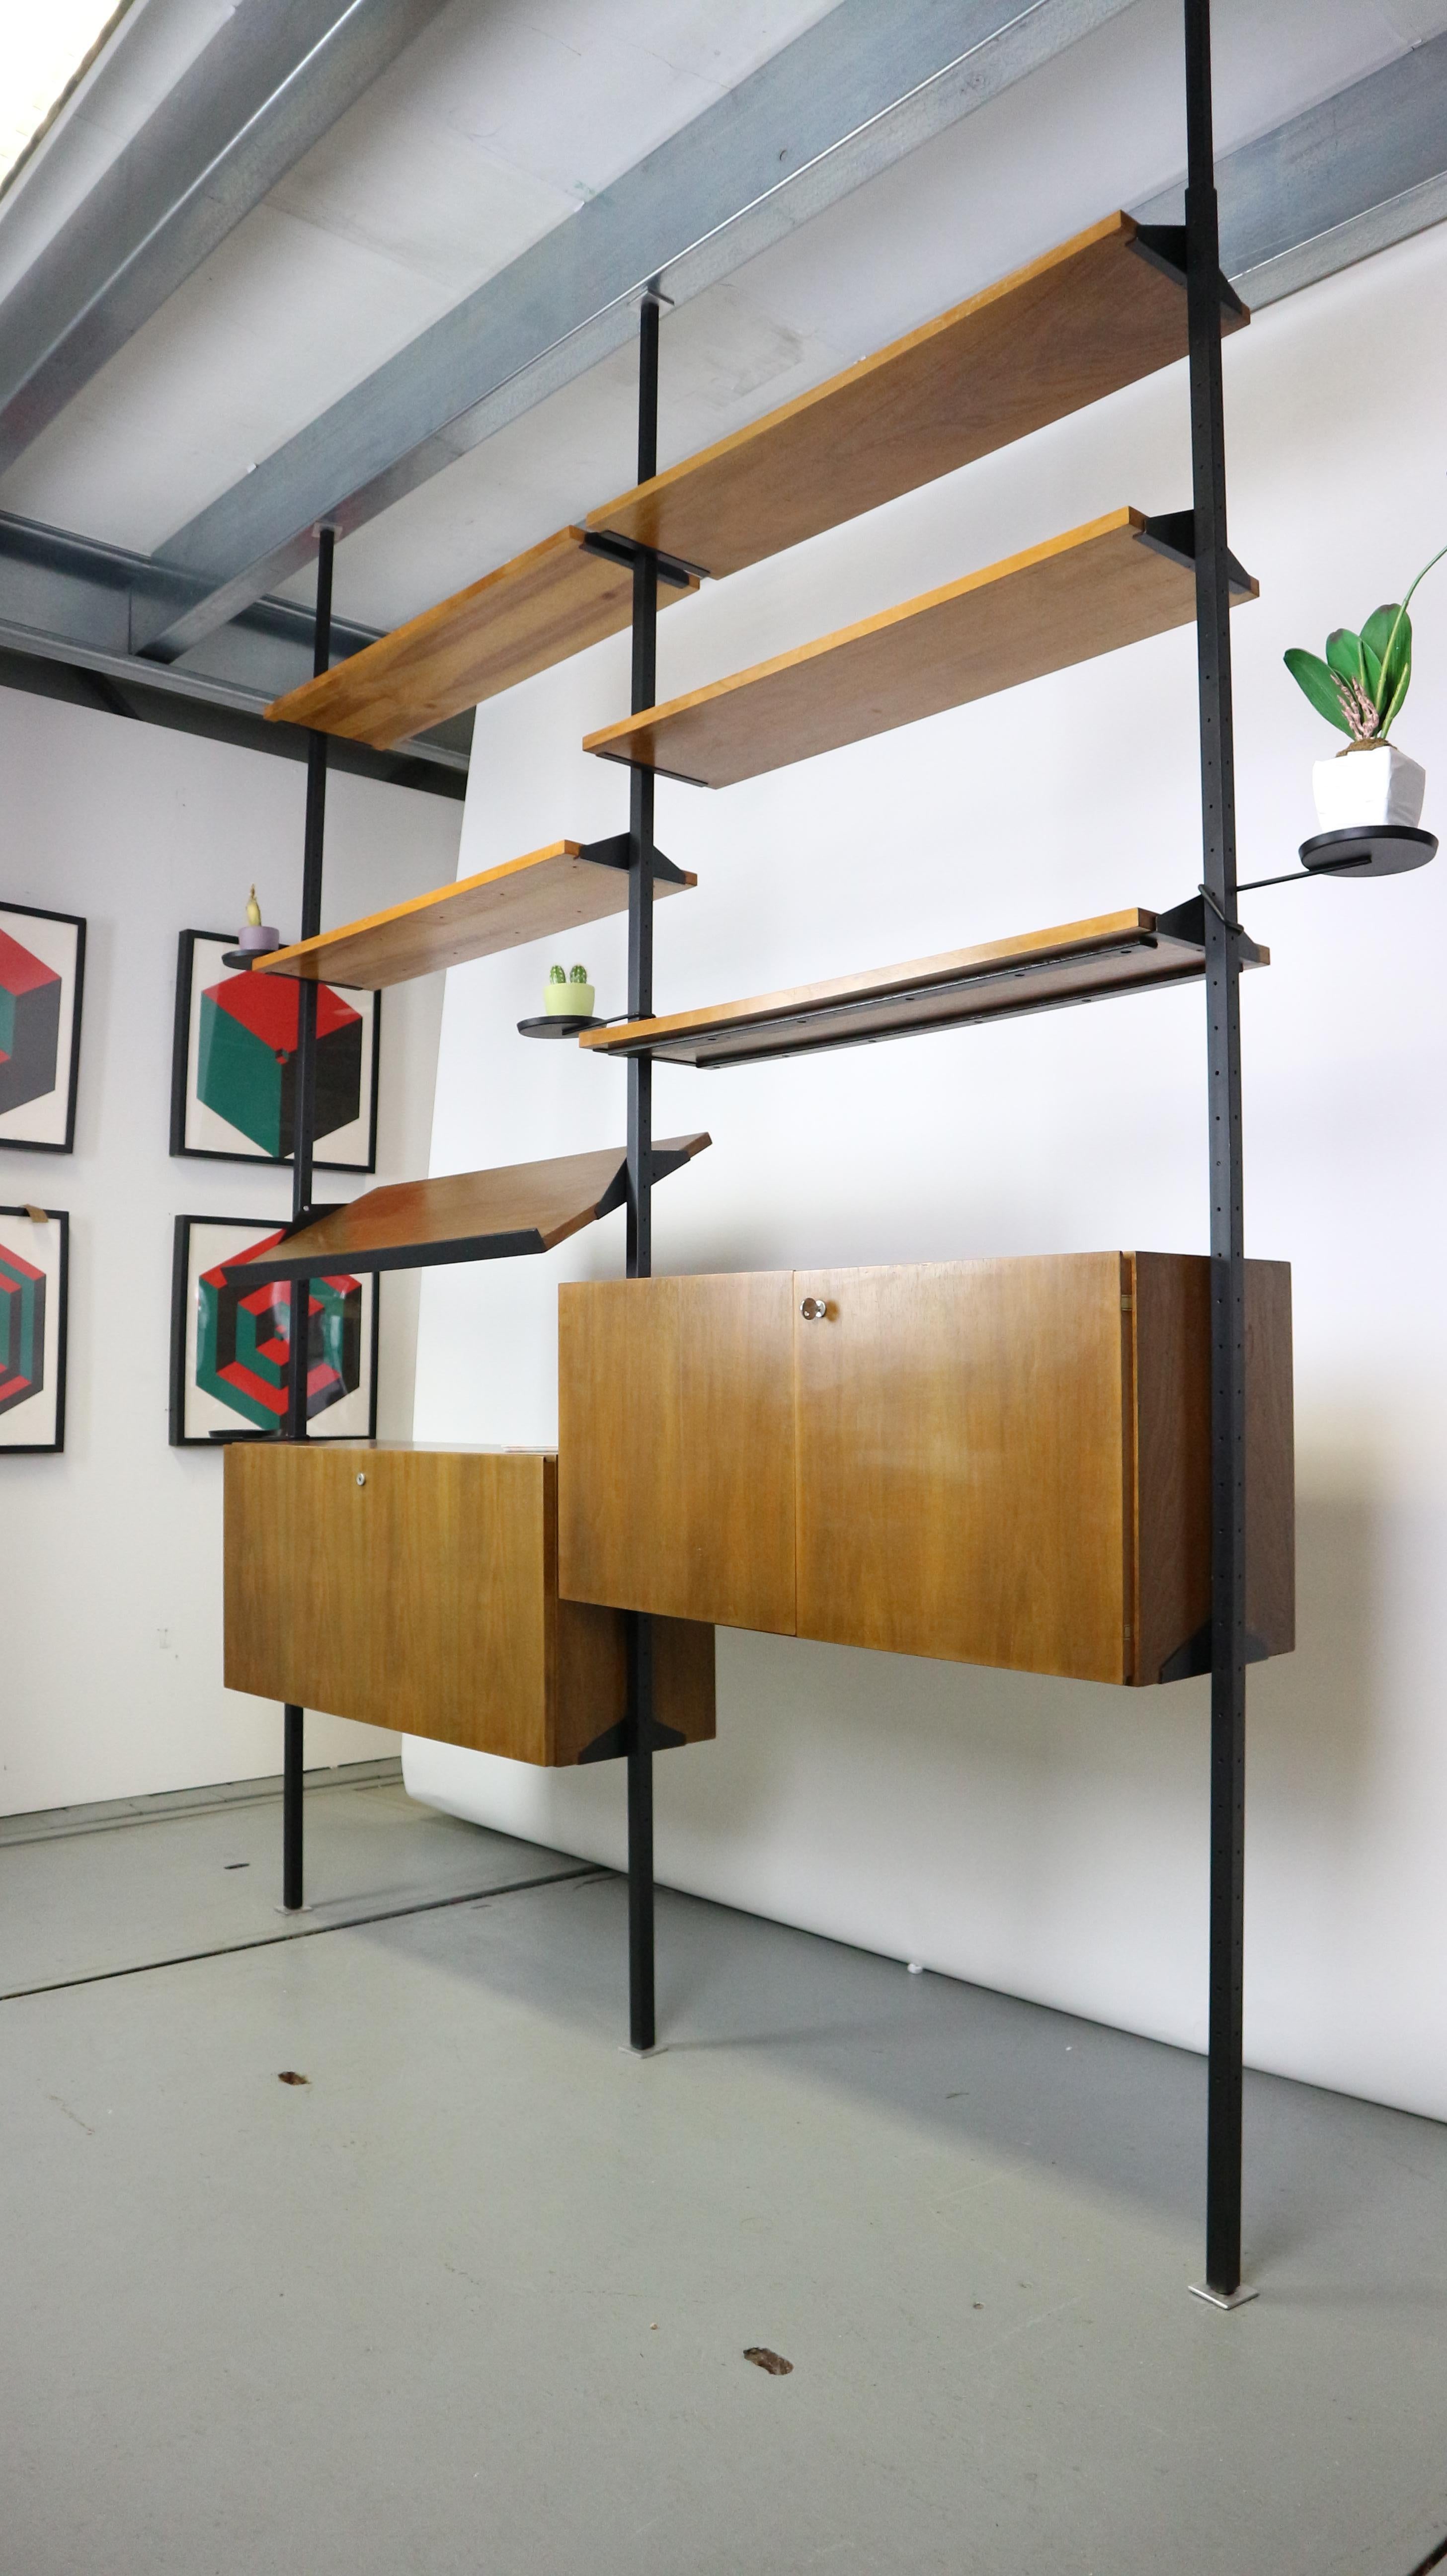 Great shelving unit is produced in the 1960s. German manufacturing. 
Made of black metal and walnut wood veneer.
This system is perfect to use as a room divider or shelving storage unit.
The metal feet has to be attached floor to ceiling. High is